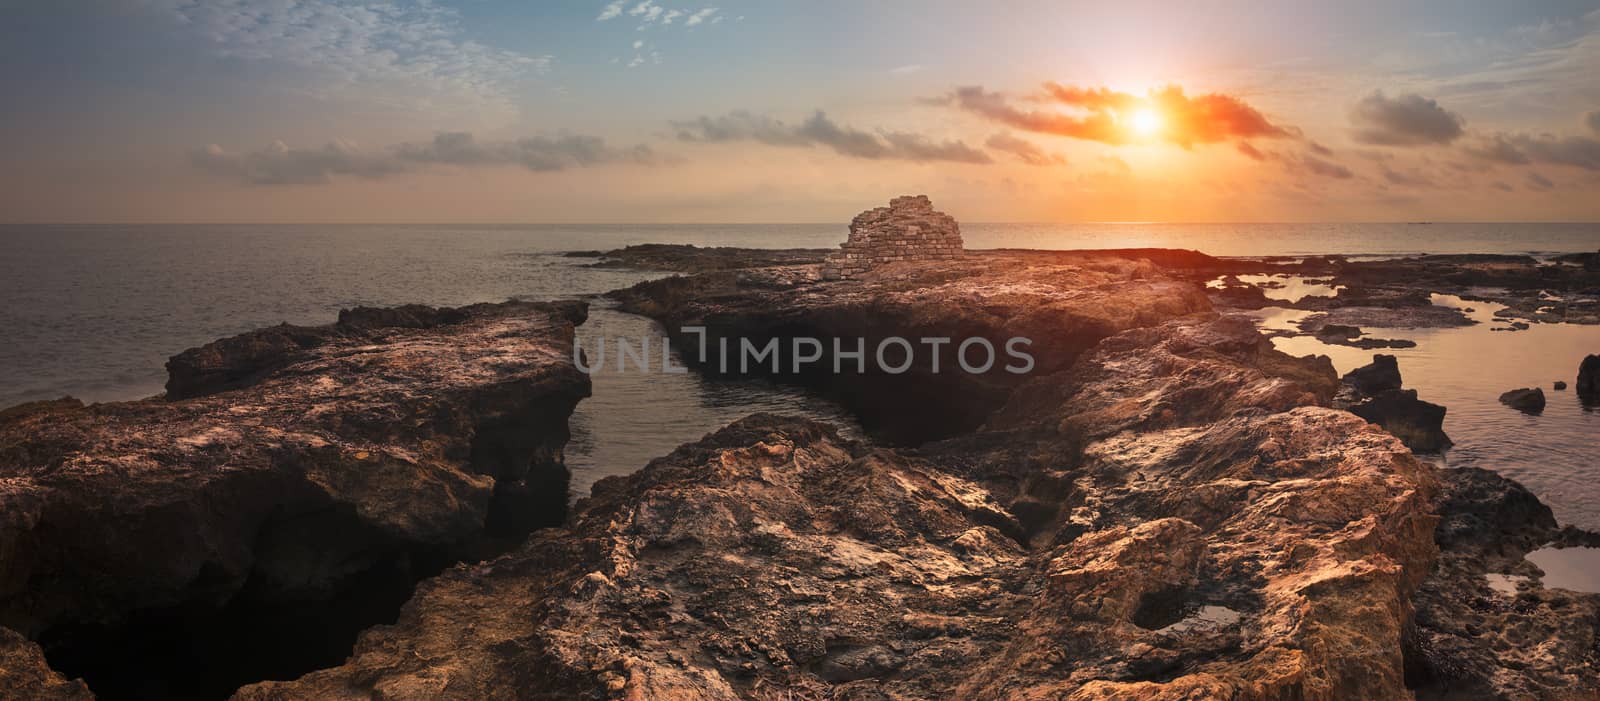 Sunset over the Sea and Rocky Coast with Ancient Ruins by Kayco